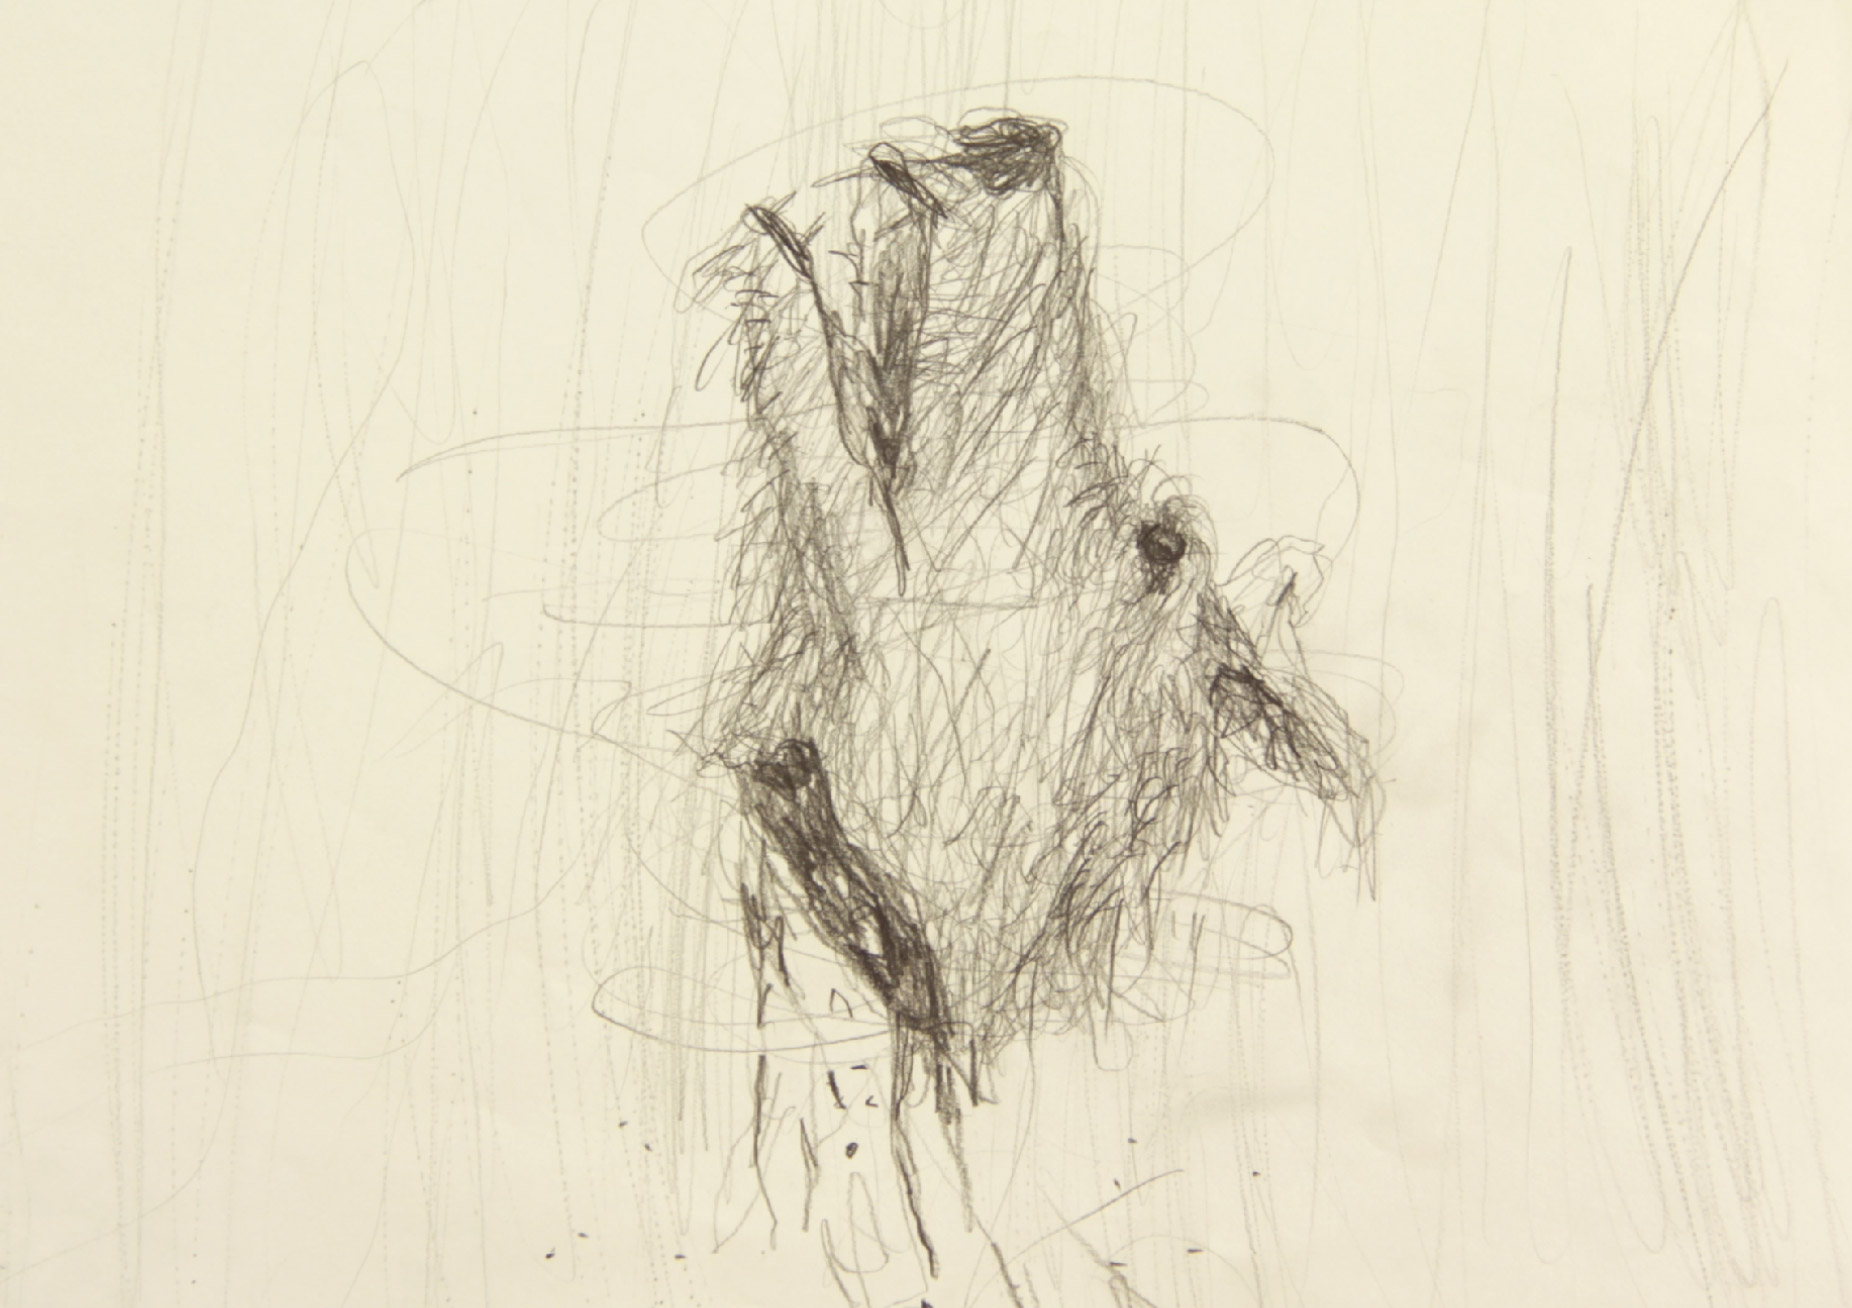 Pencil drawing of a dog's severed head